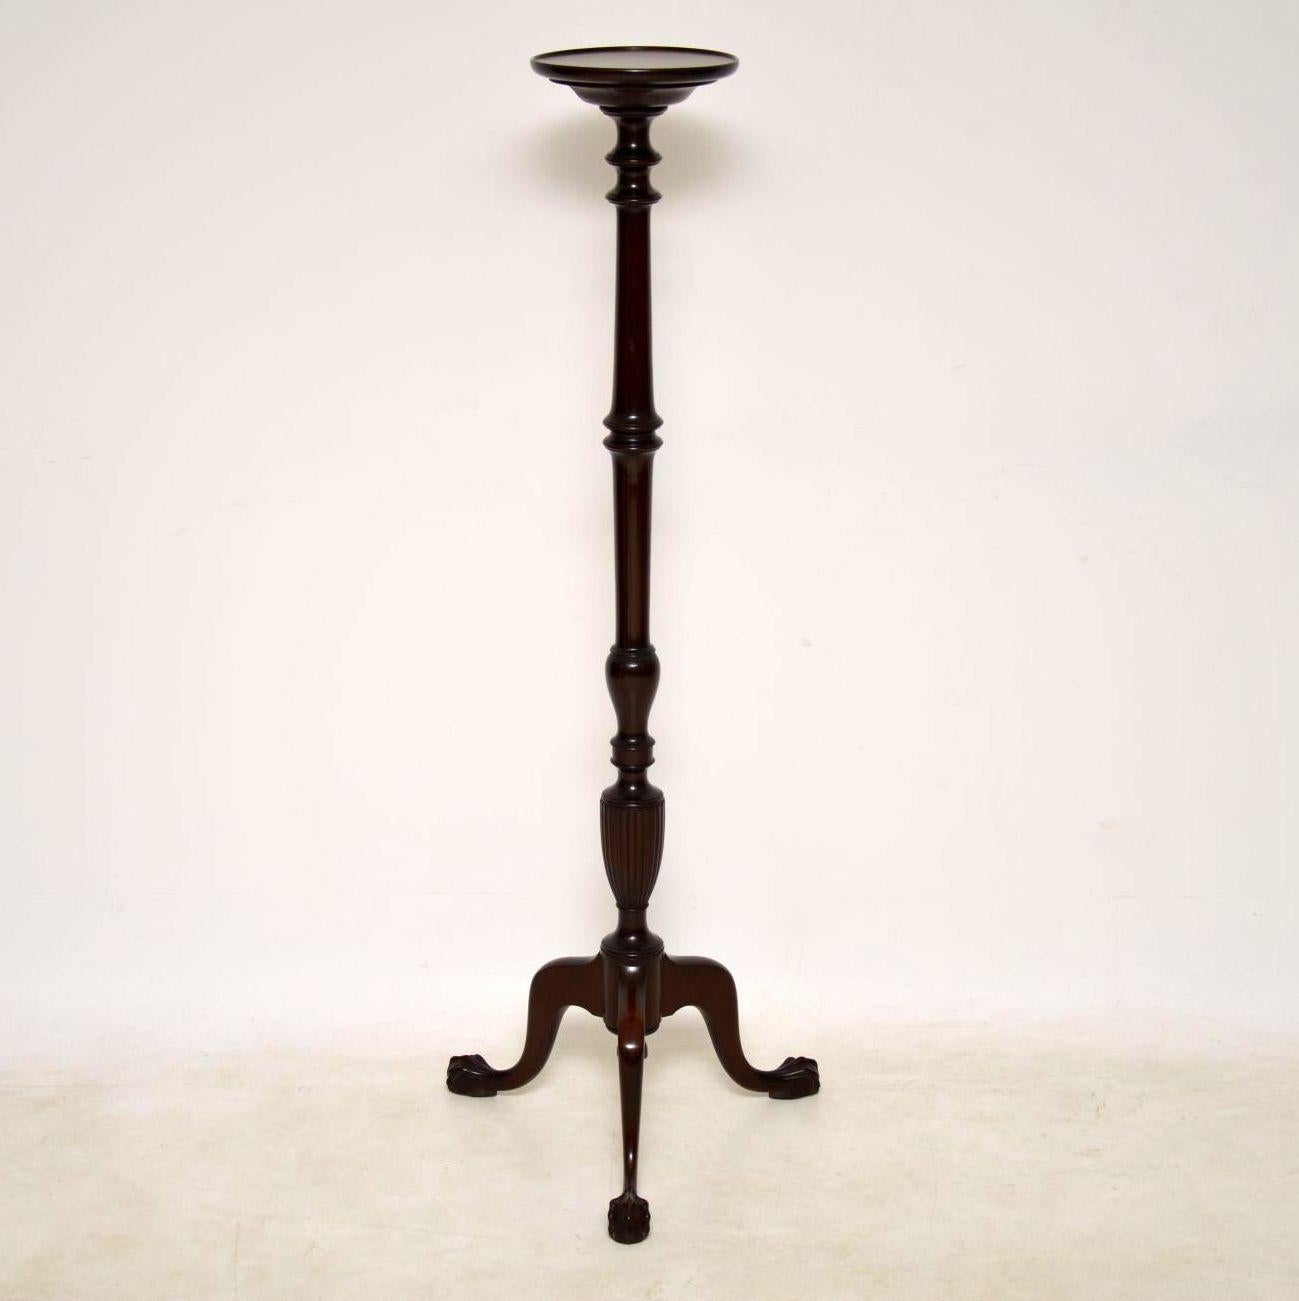 Antique Georgian style torchere in lovely condition & dating from around the 1920’s period. It has a nicely turned column with plenty of twists & turns all the way down. The tripod legs have ball & claw feet.

Measure: Width base – 21 inches, 53